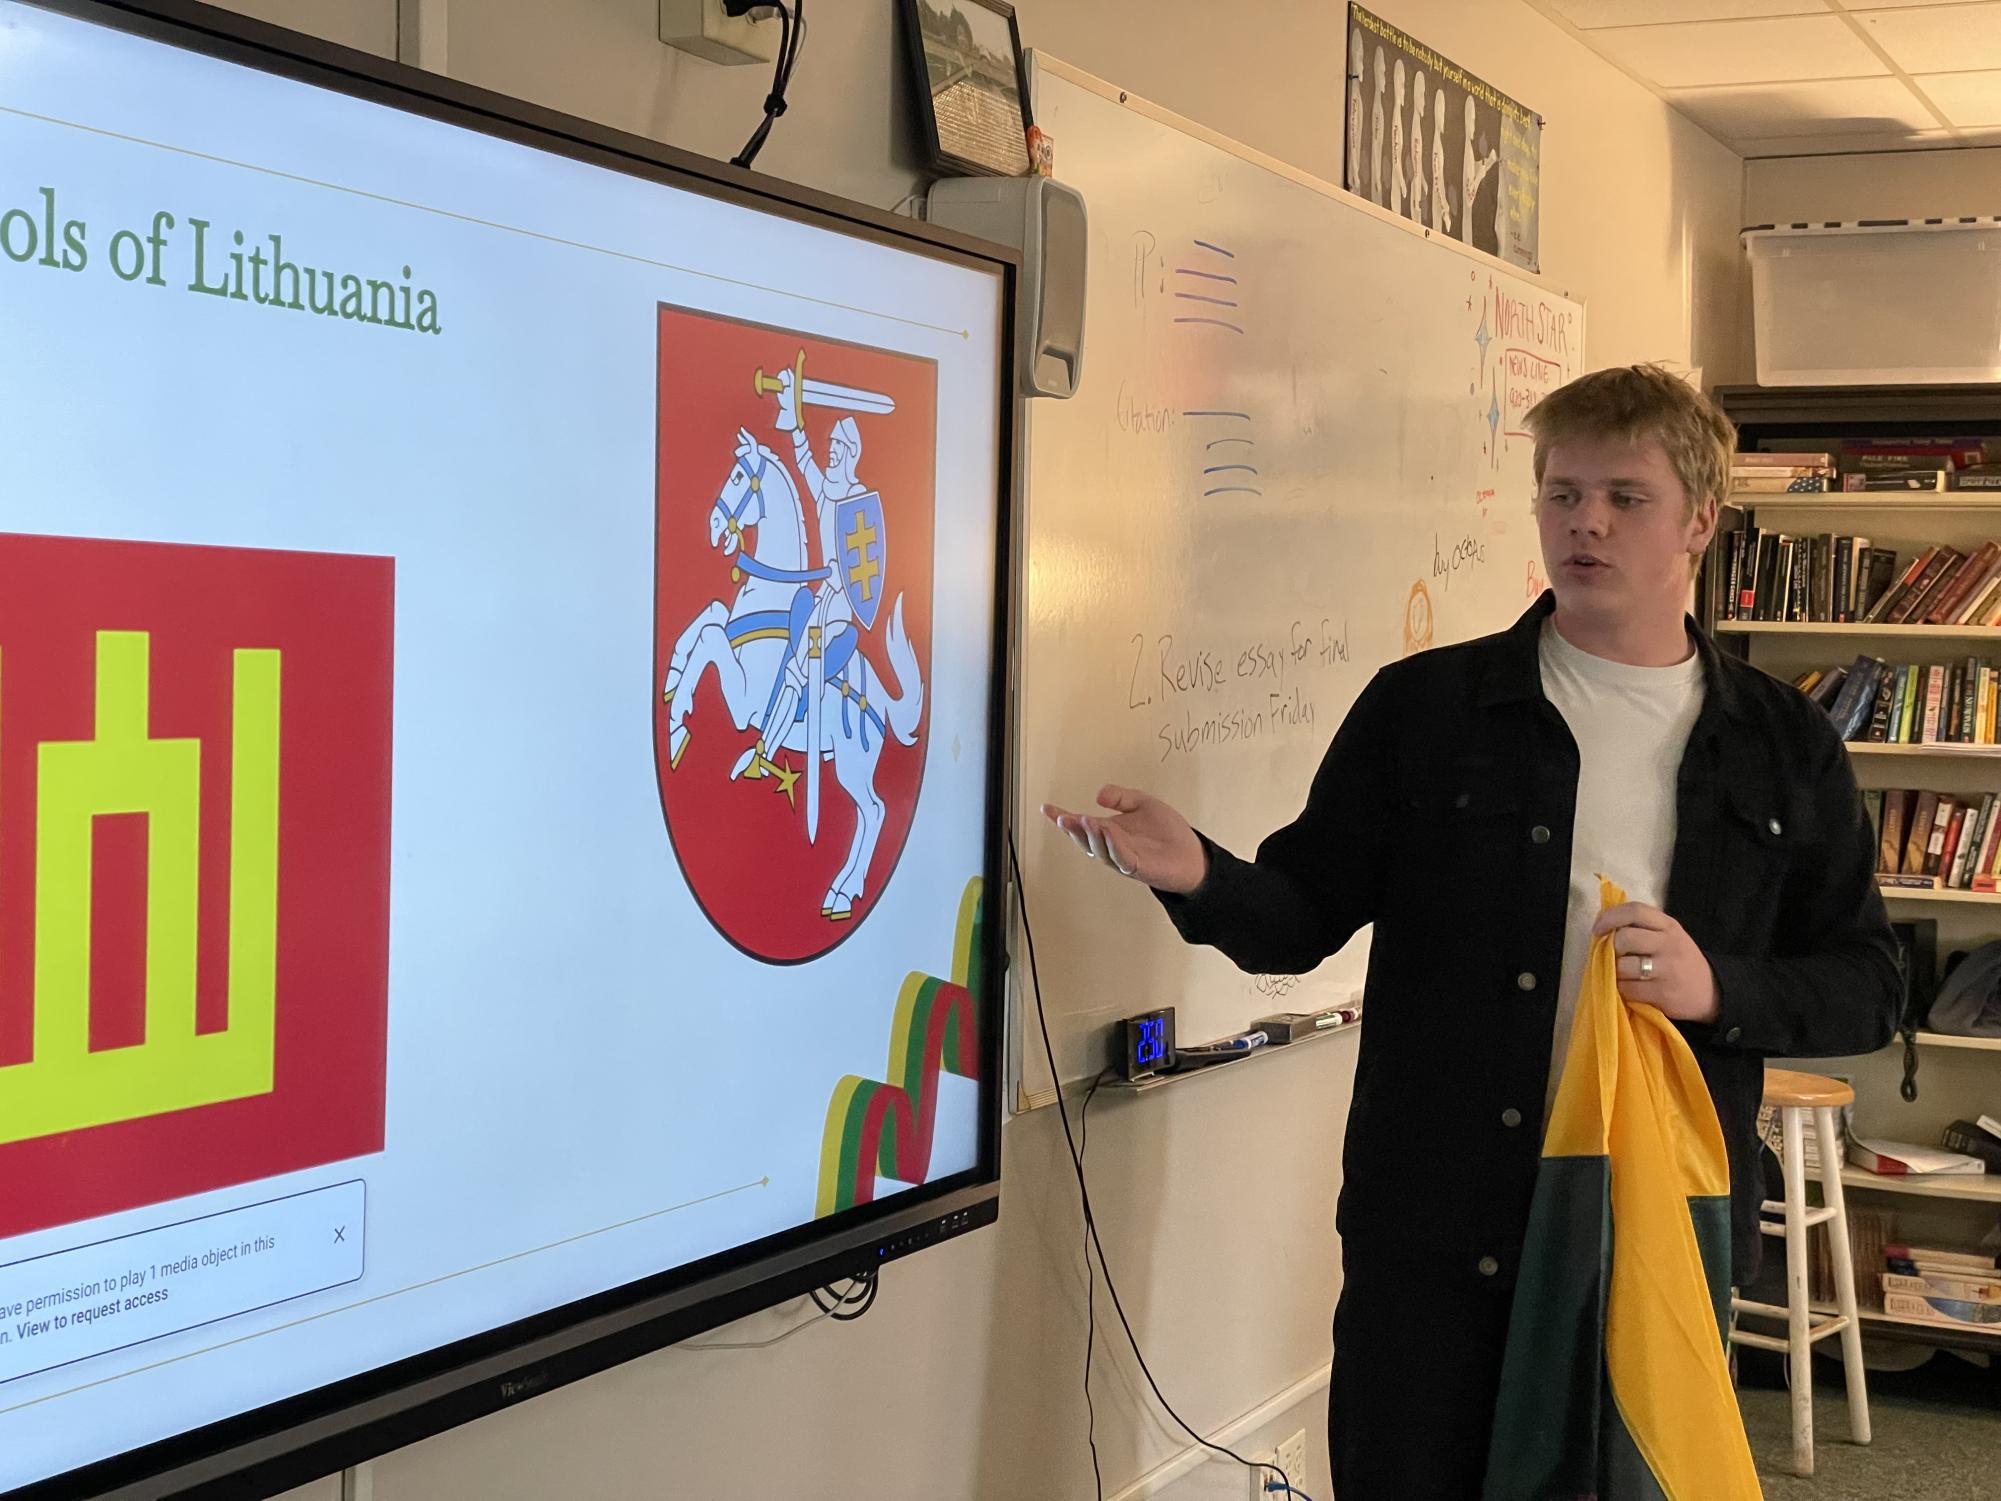 Foreign exchange student Emilijus Daubaras presents to class about his home country.